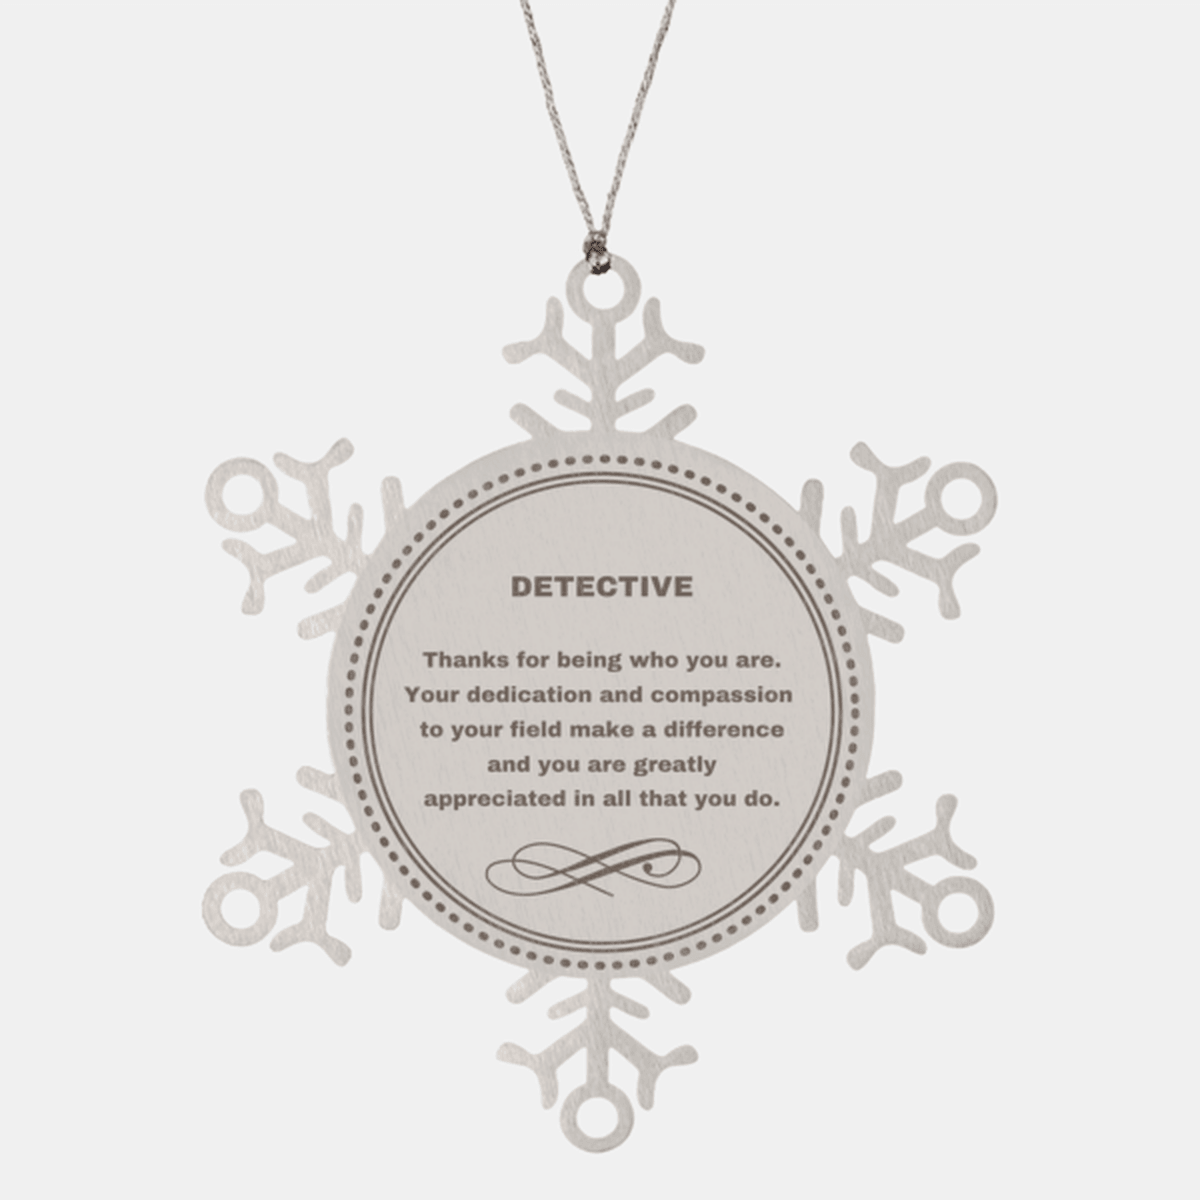 Detective Snowflake Ornament - Thanks for being who you are - Birthday Christmas Jewelry Gifts Coworkers Colleague Boss - Mallard Moon Gift Shop